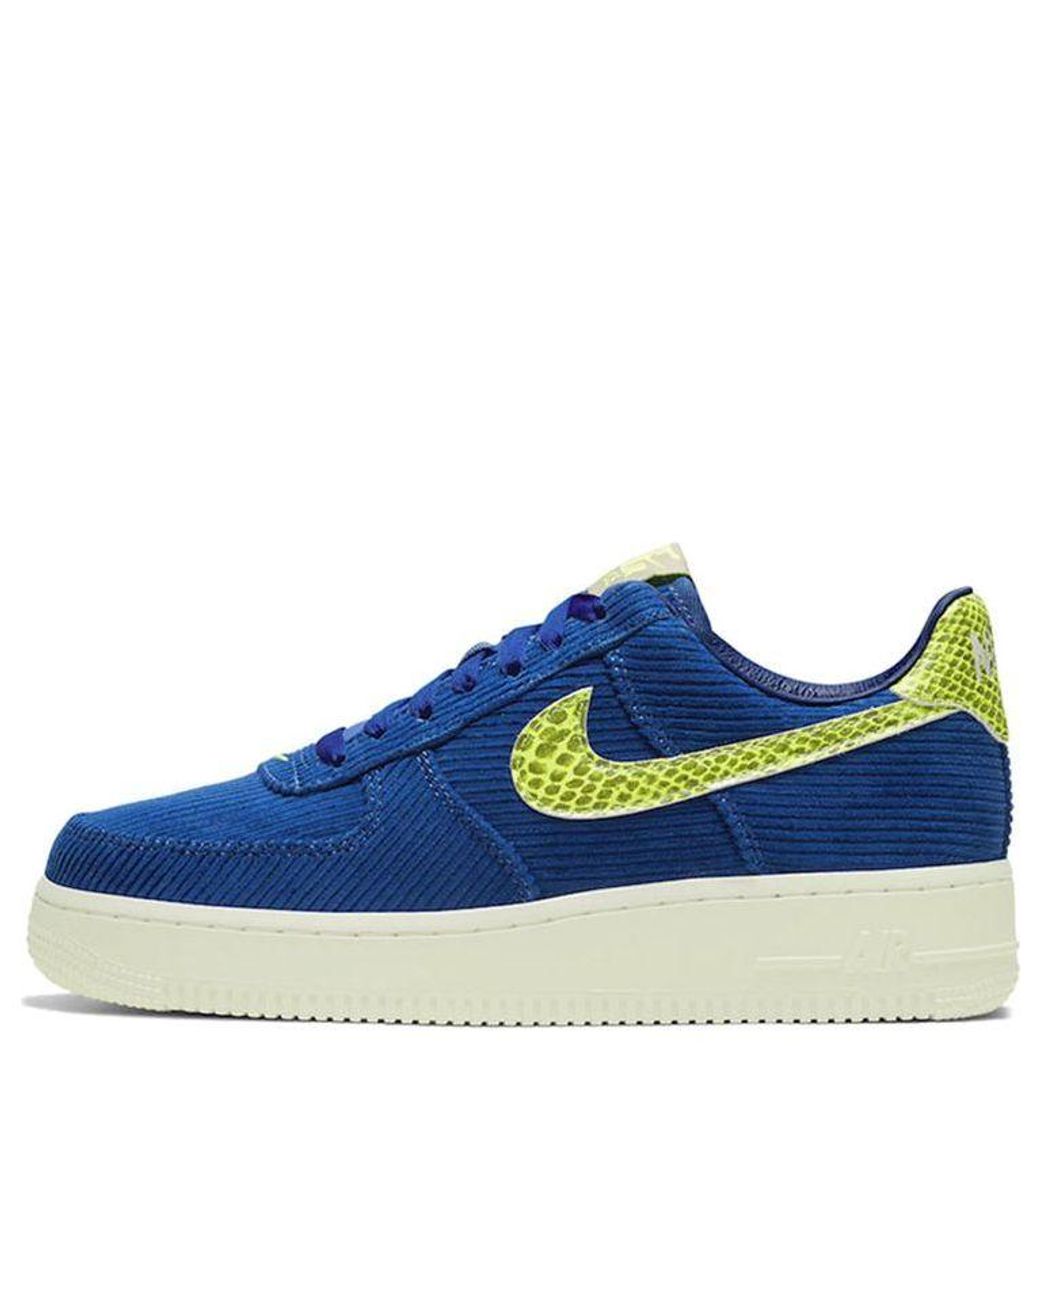 Nike Olivia Kim X Air Force 1 '0 'no Cover' in Blue | Lyst